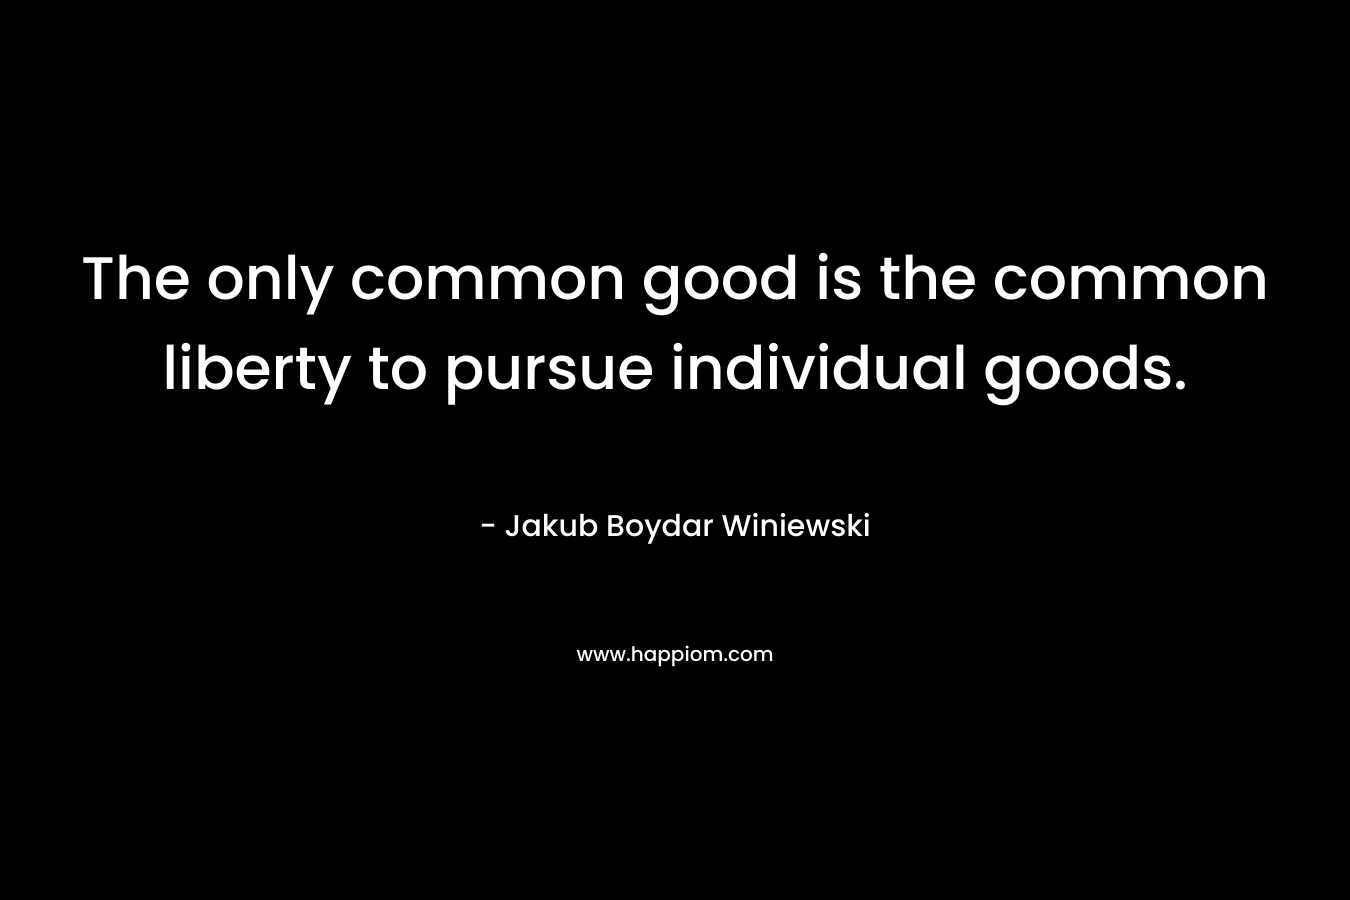 The only common good is the common liberty to pursue individual goods.